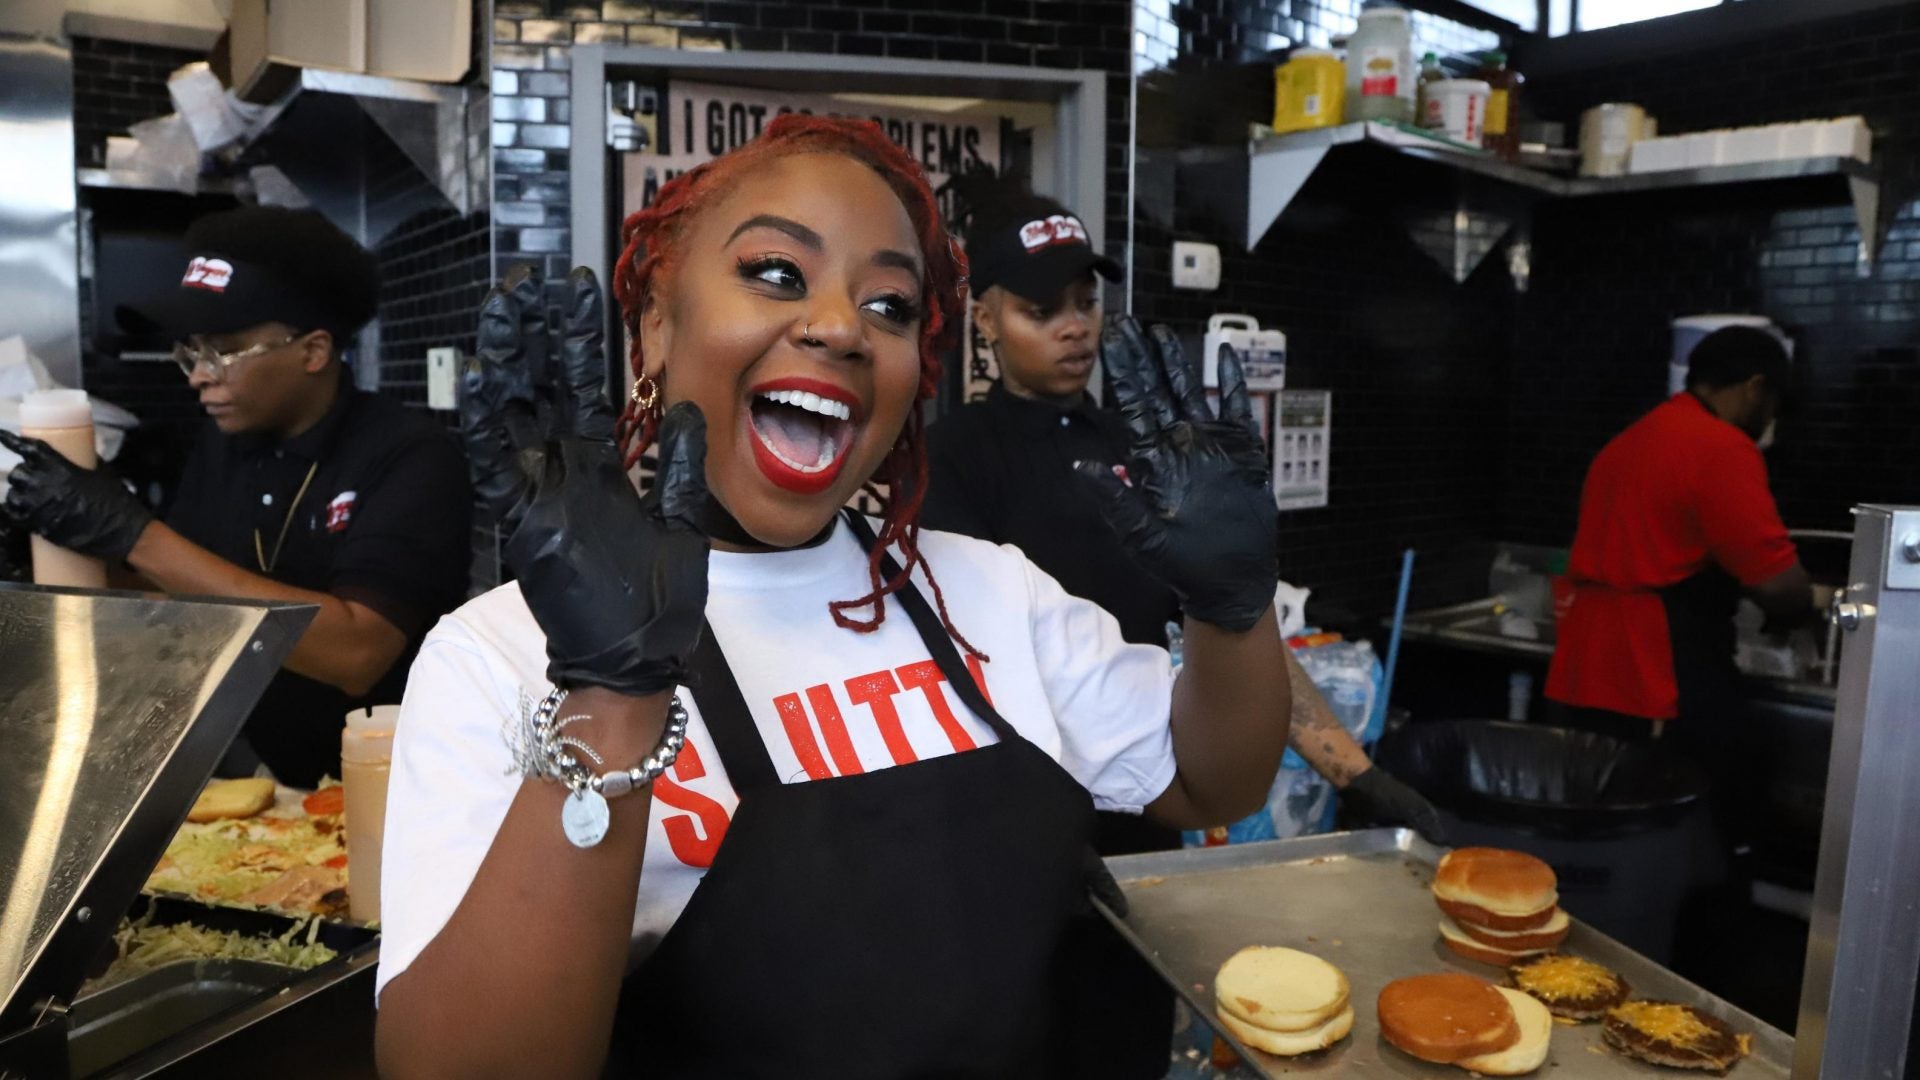 ‘Slutty Vegan’ Owner Pinky Cole Is Hyper Focused On Social Justice, Engaging With Her Community